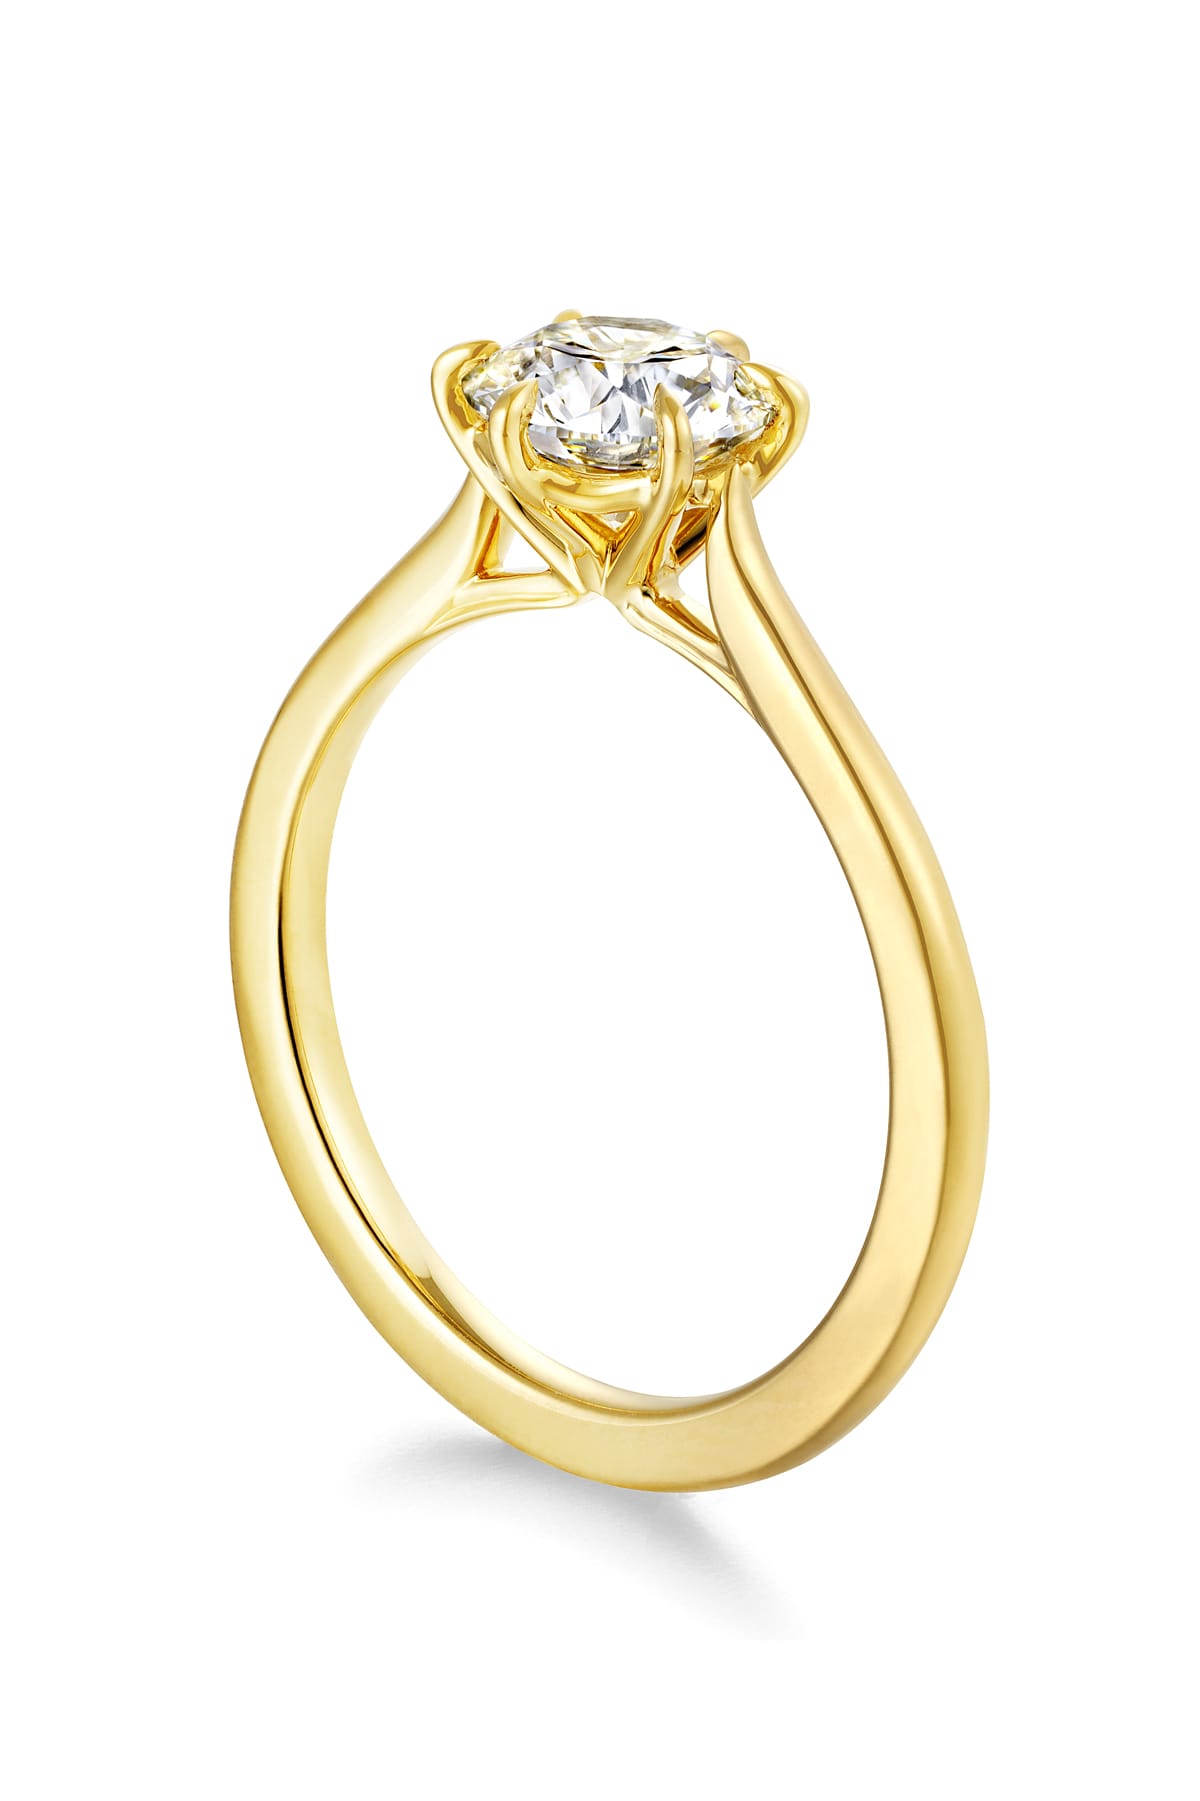 Camilla 6 Prong Engagement Ring From Hearts On Fire available at LeGassick Diamonds and Jewellery Gold Coast, Australia.